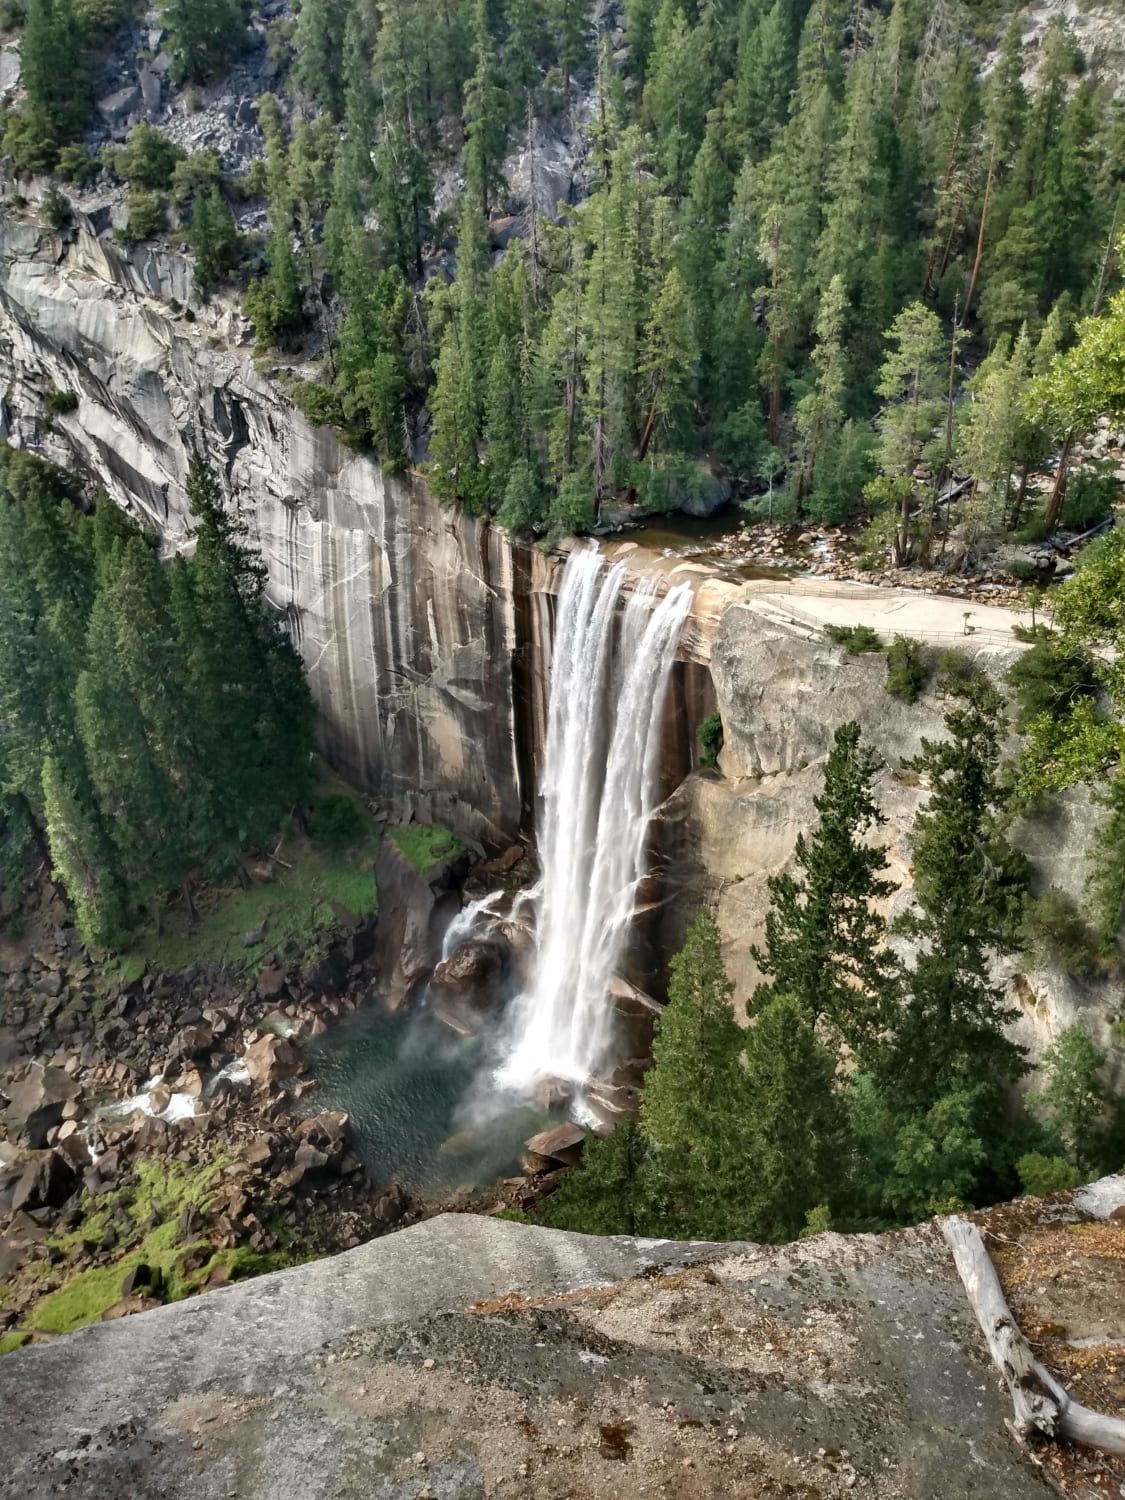 View of Vernal Falls coming down the mist trail in Yosemite National Park, US